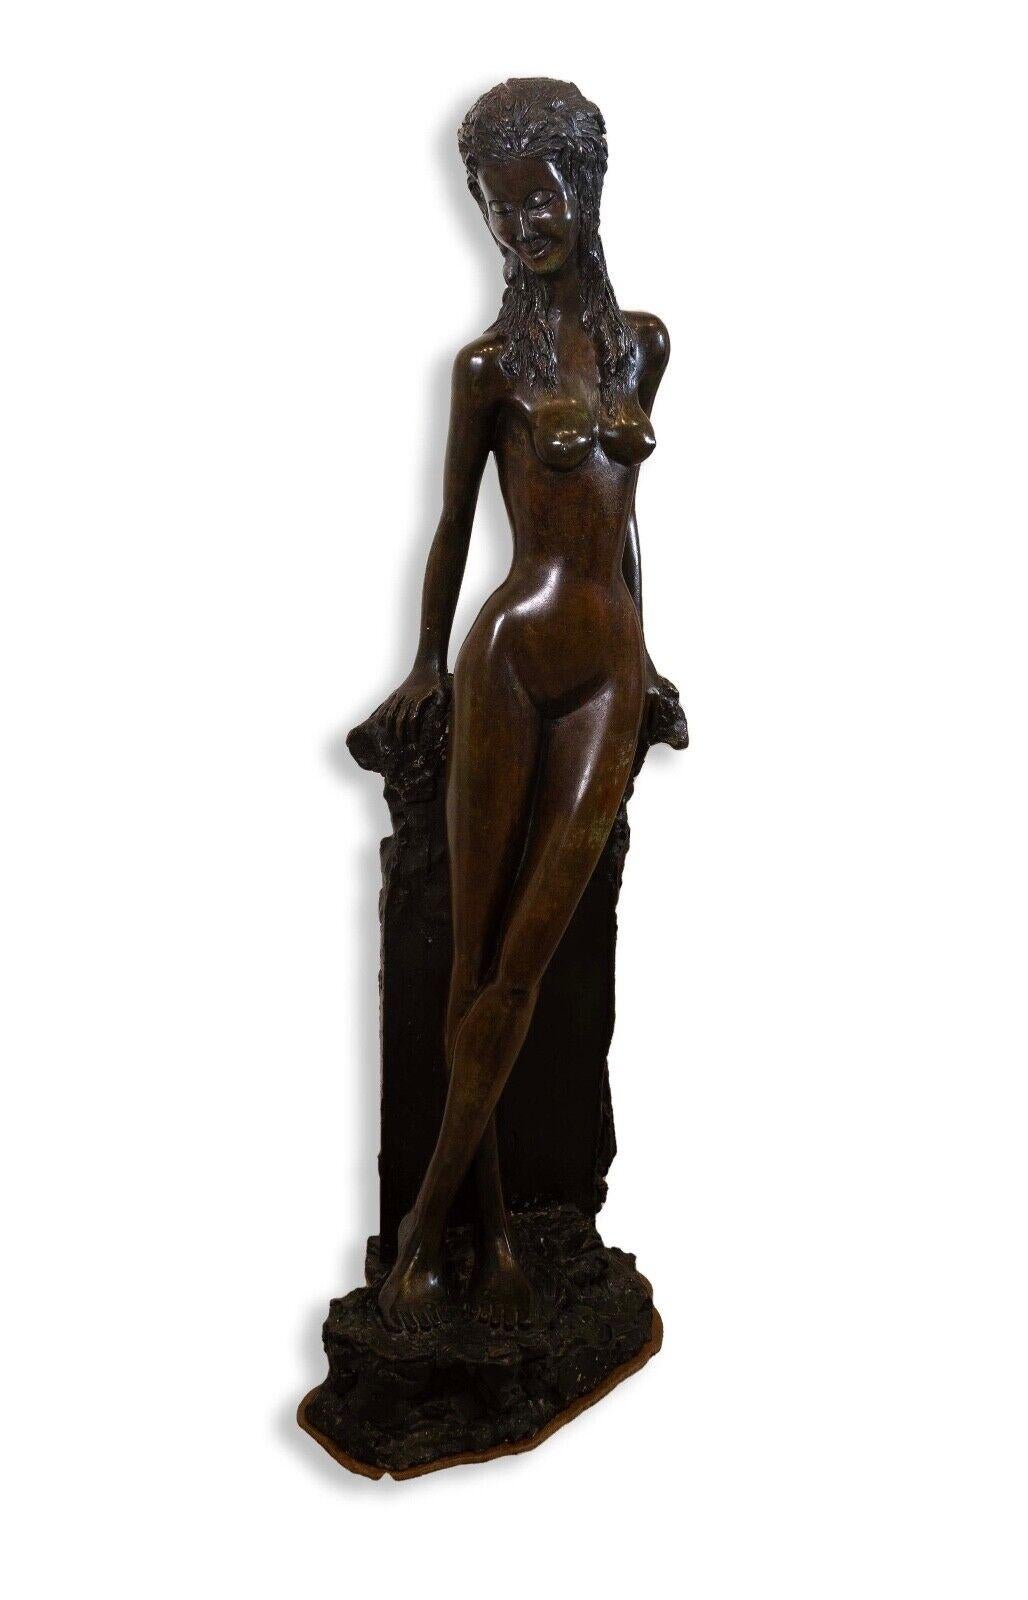 A lovely modern female nude bronze decorative figurative sculpture. Stylized in an Art Deco or Art Nouveau style. Artist unknown. A romantic and timeless composition. From a private collection. Dimensions: 39.5”h x 15”w x 11”d. In very good